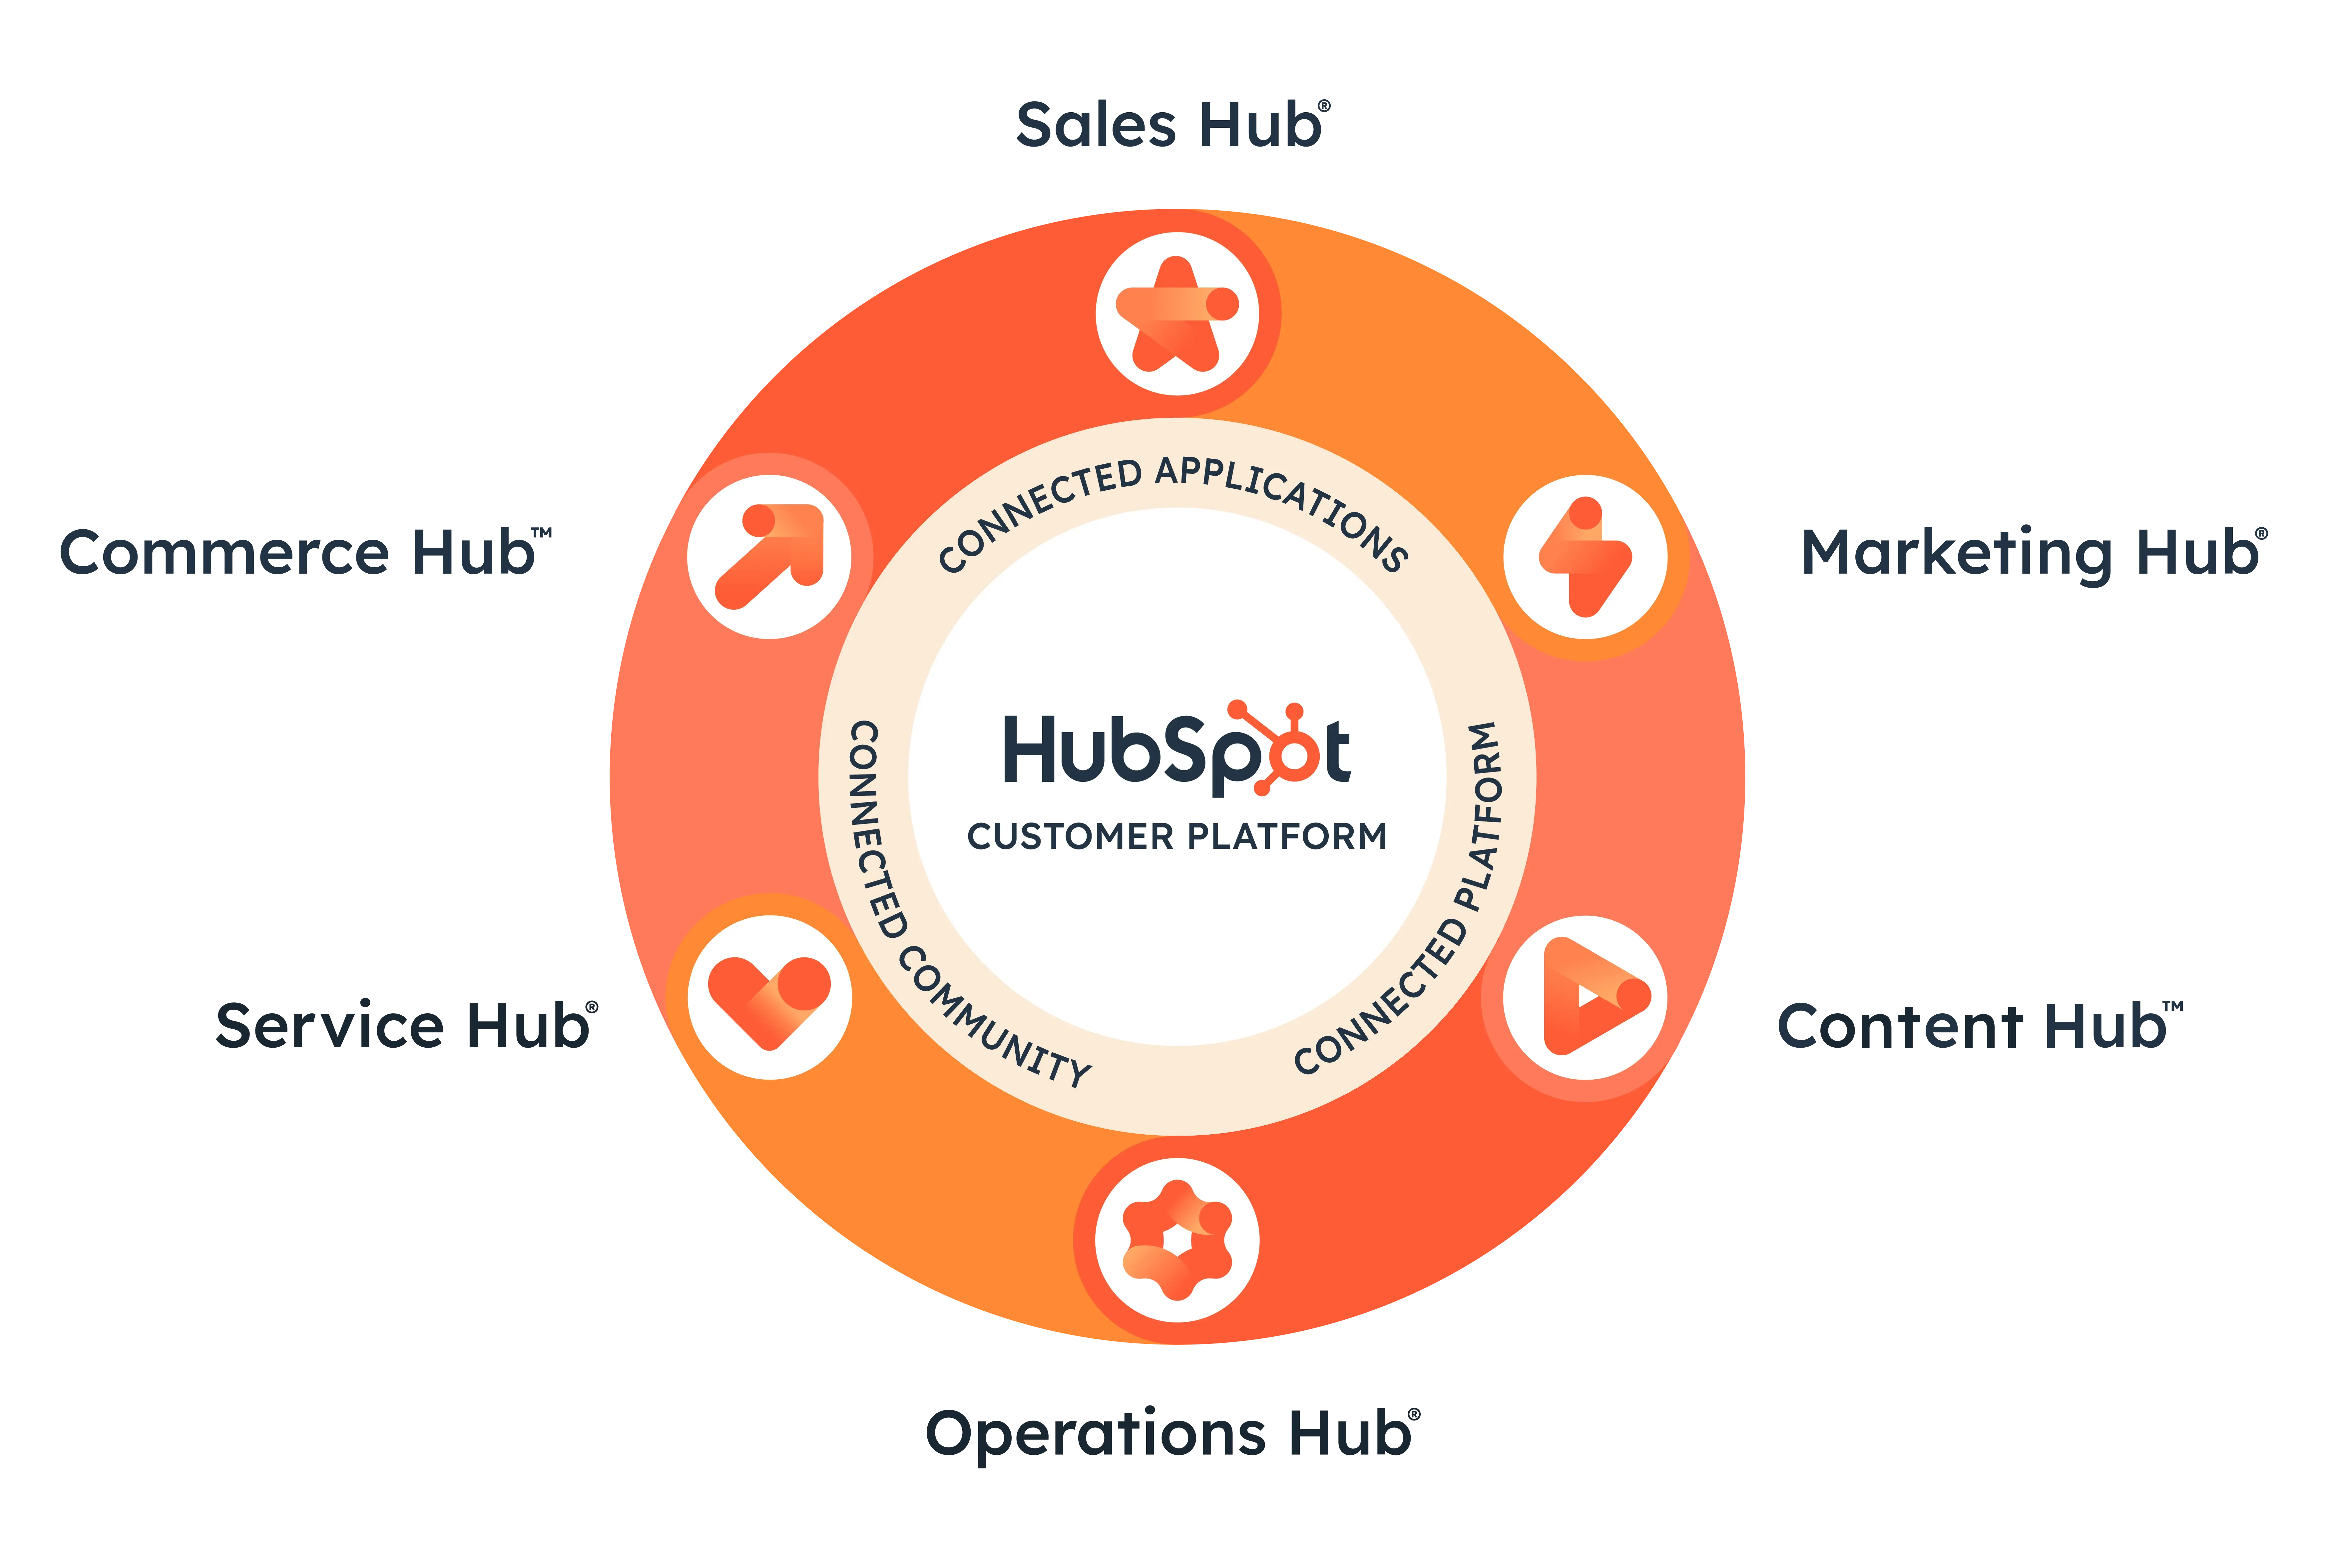 circle showing the 6 hubs of HubSpot (marketing, service, content, operations, commerce, and sales), along with the central HubSpot platform that ties them all together.